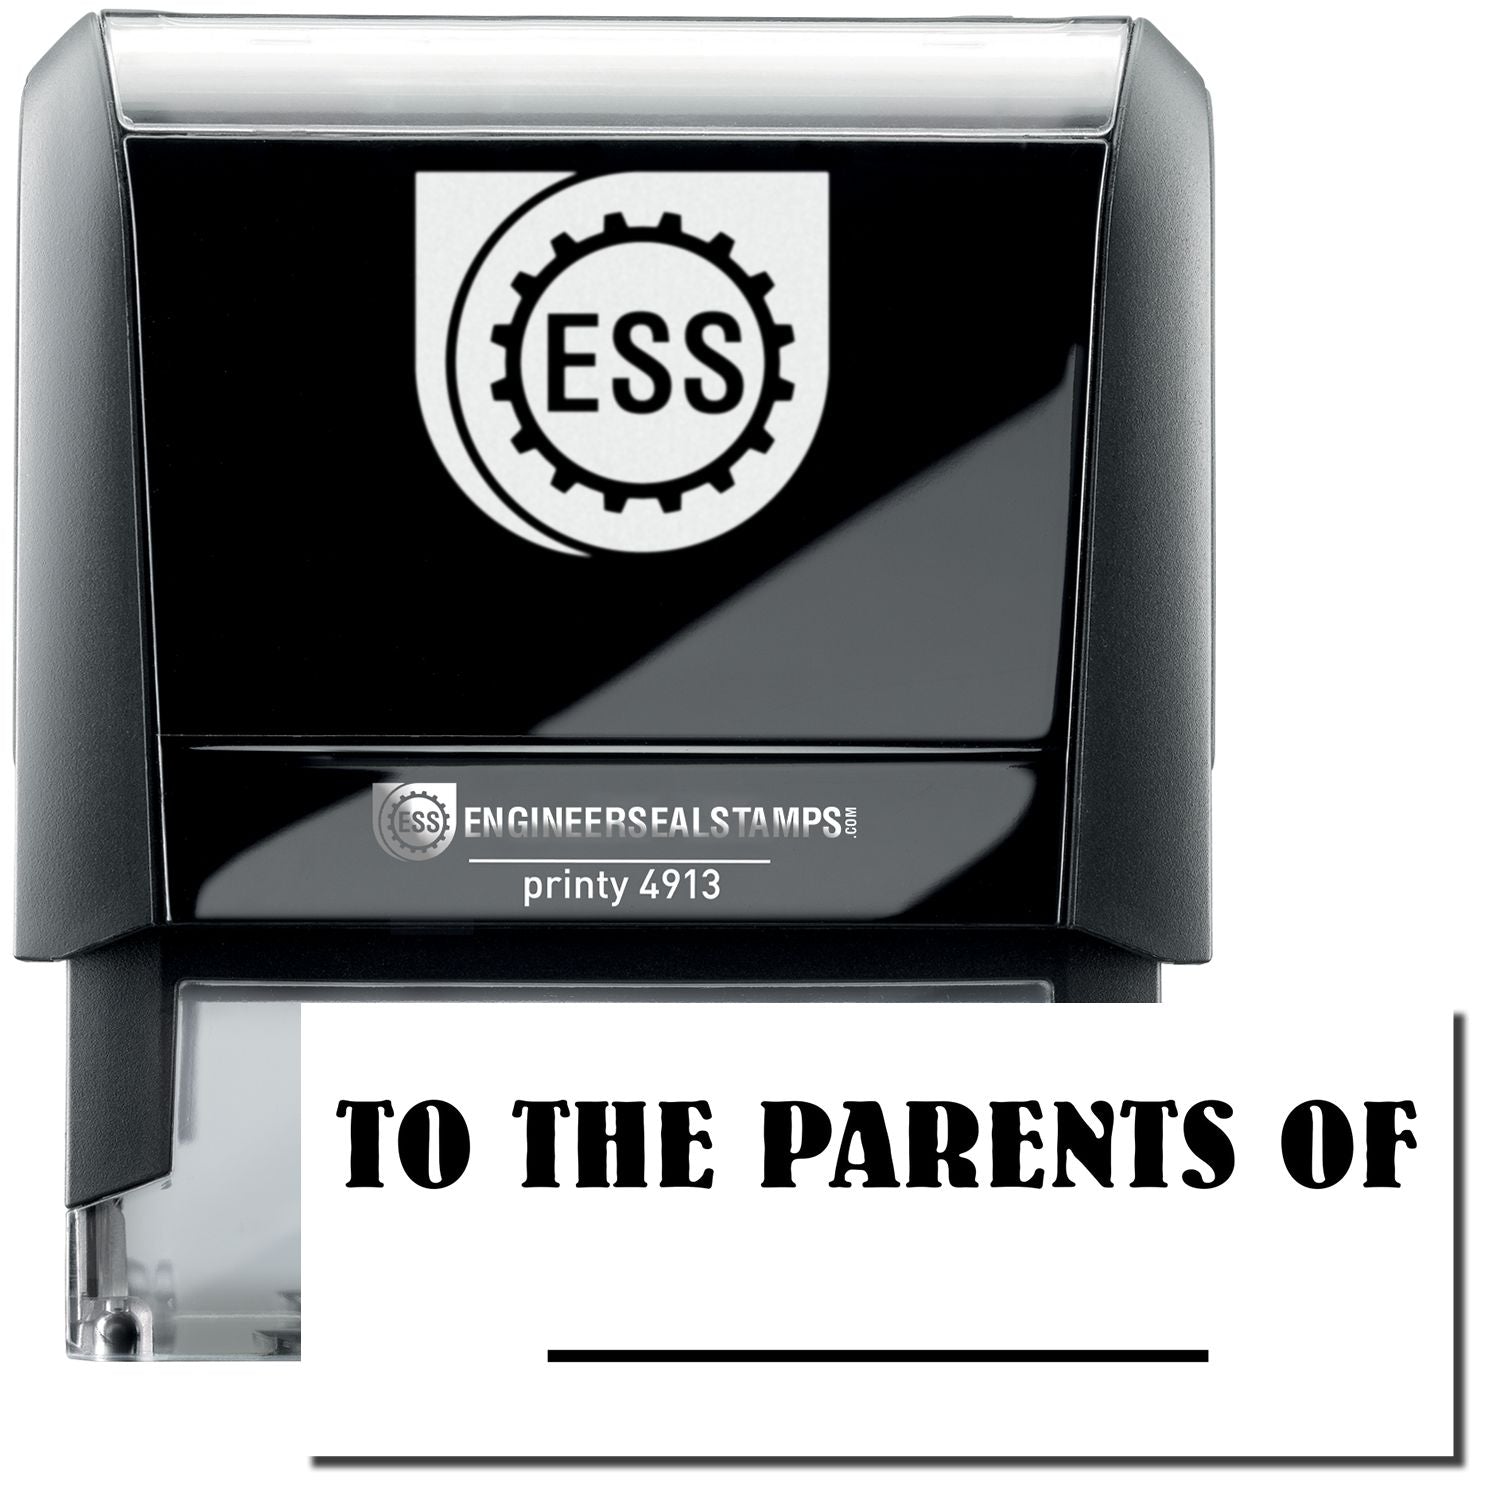 A self-inking stamp with a stamped image showing how the text "TO THE PARENTS OF _____" in a large bold font with a line is displayed by it.